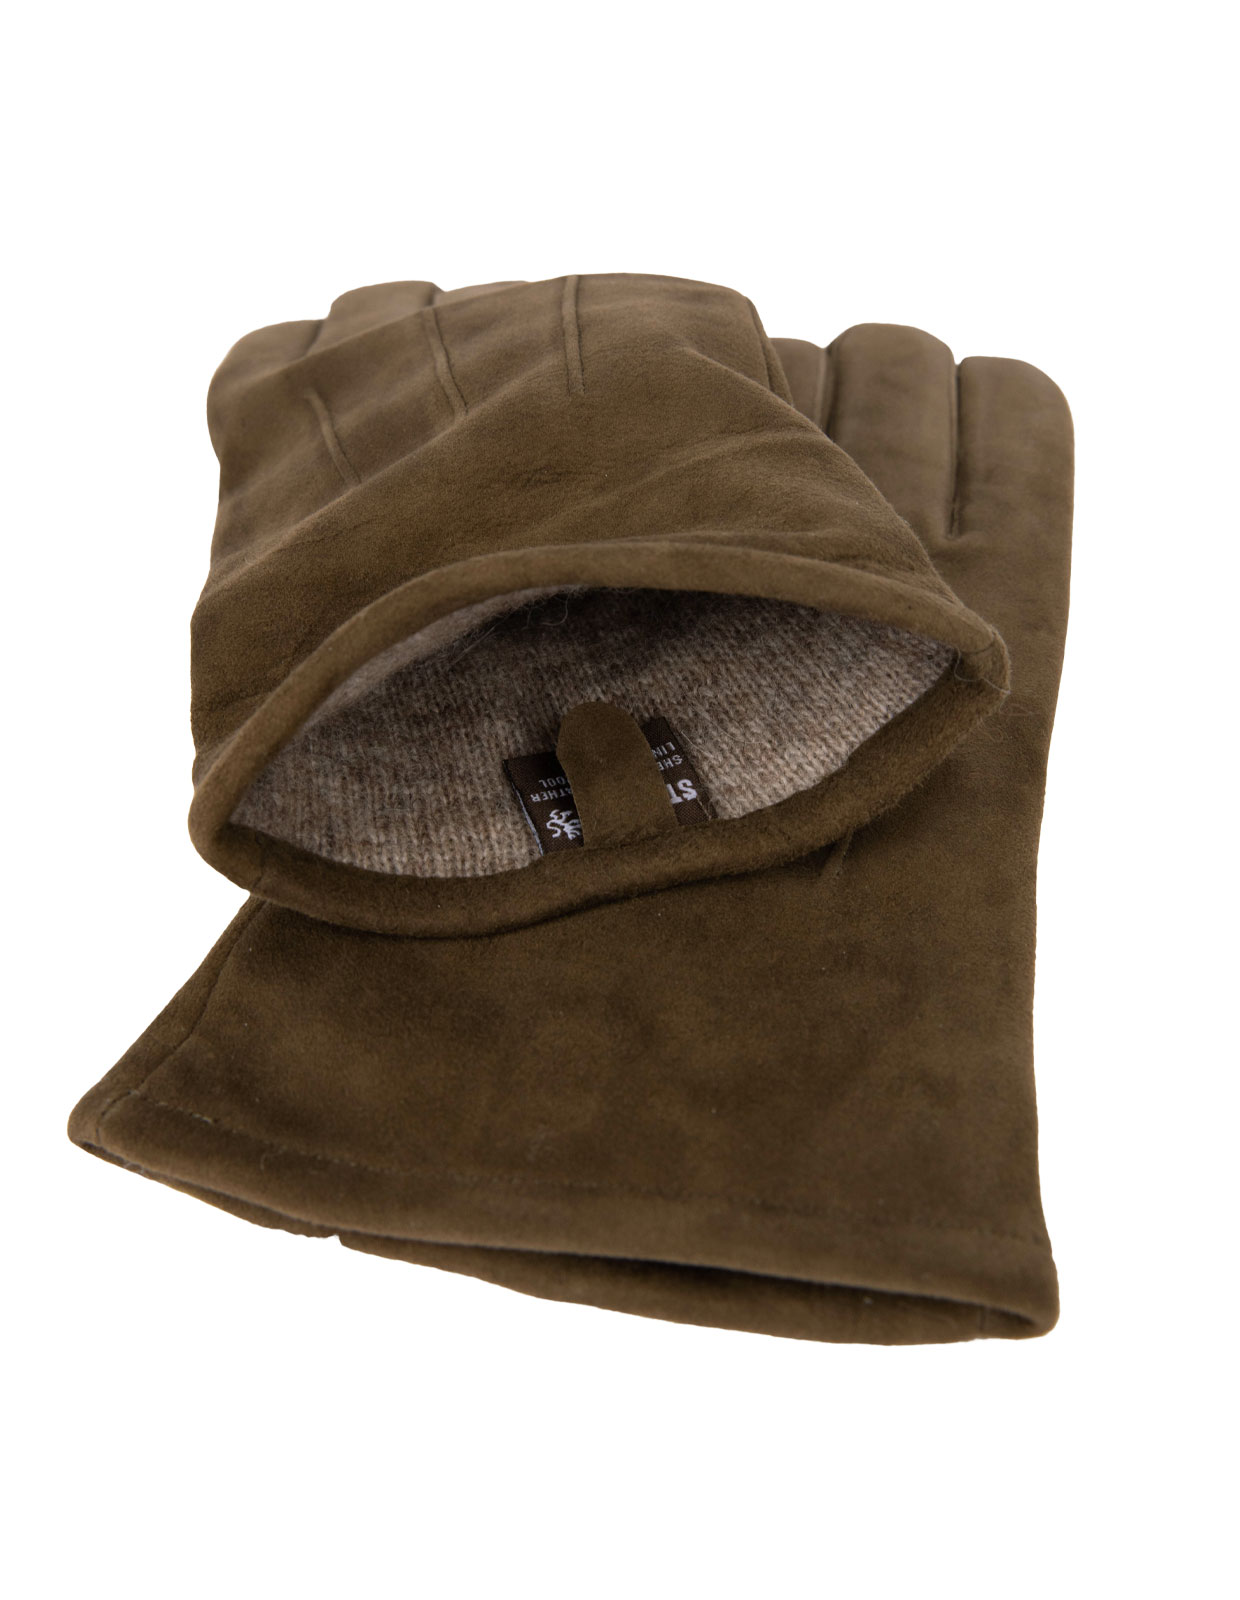 Classic Suede Gloves Olive Green